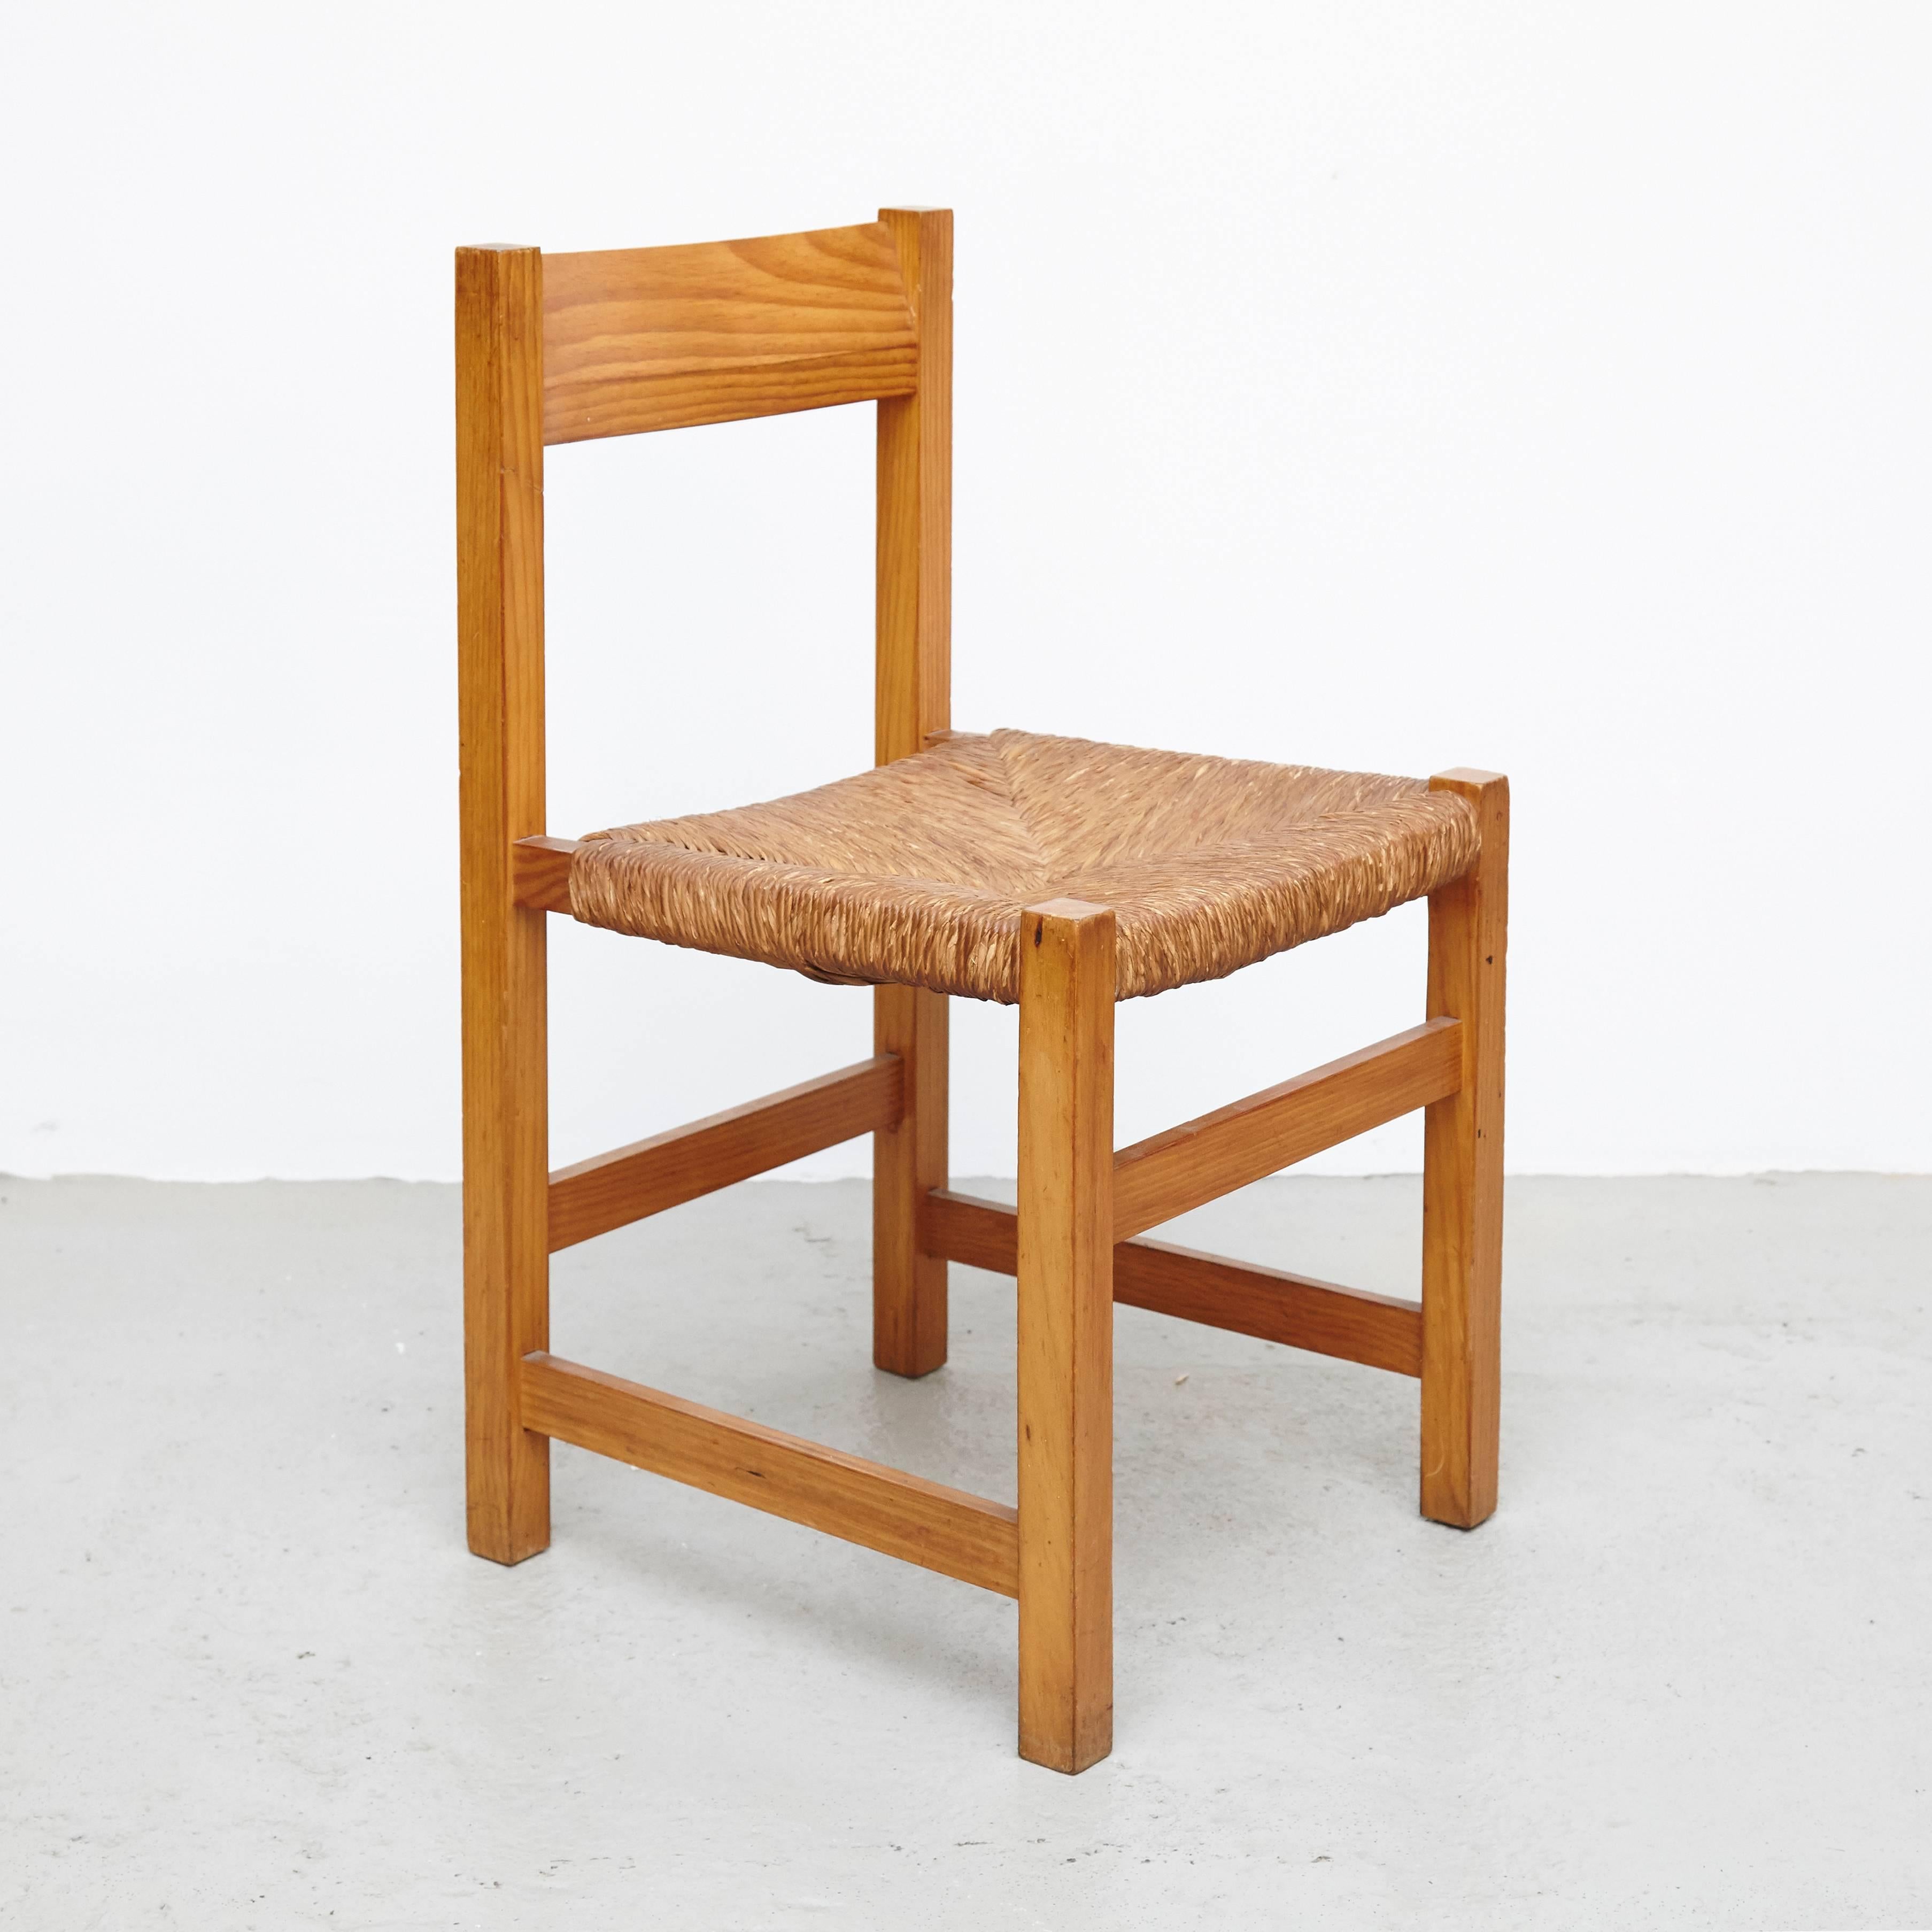 Mid-20th Century Pair of Spanish Chairs from 1950s